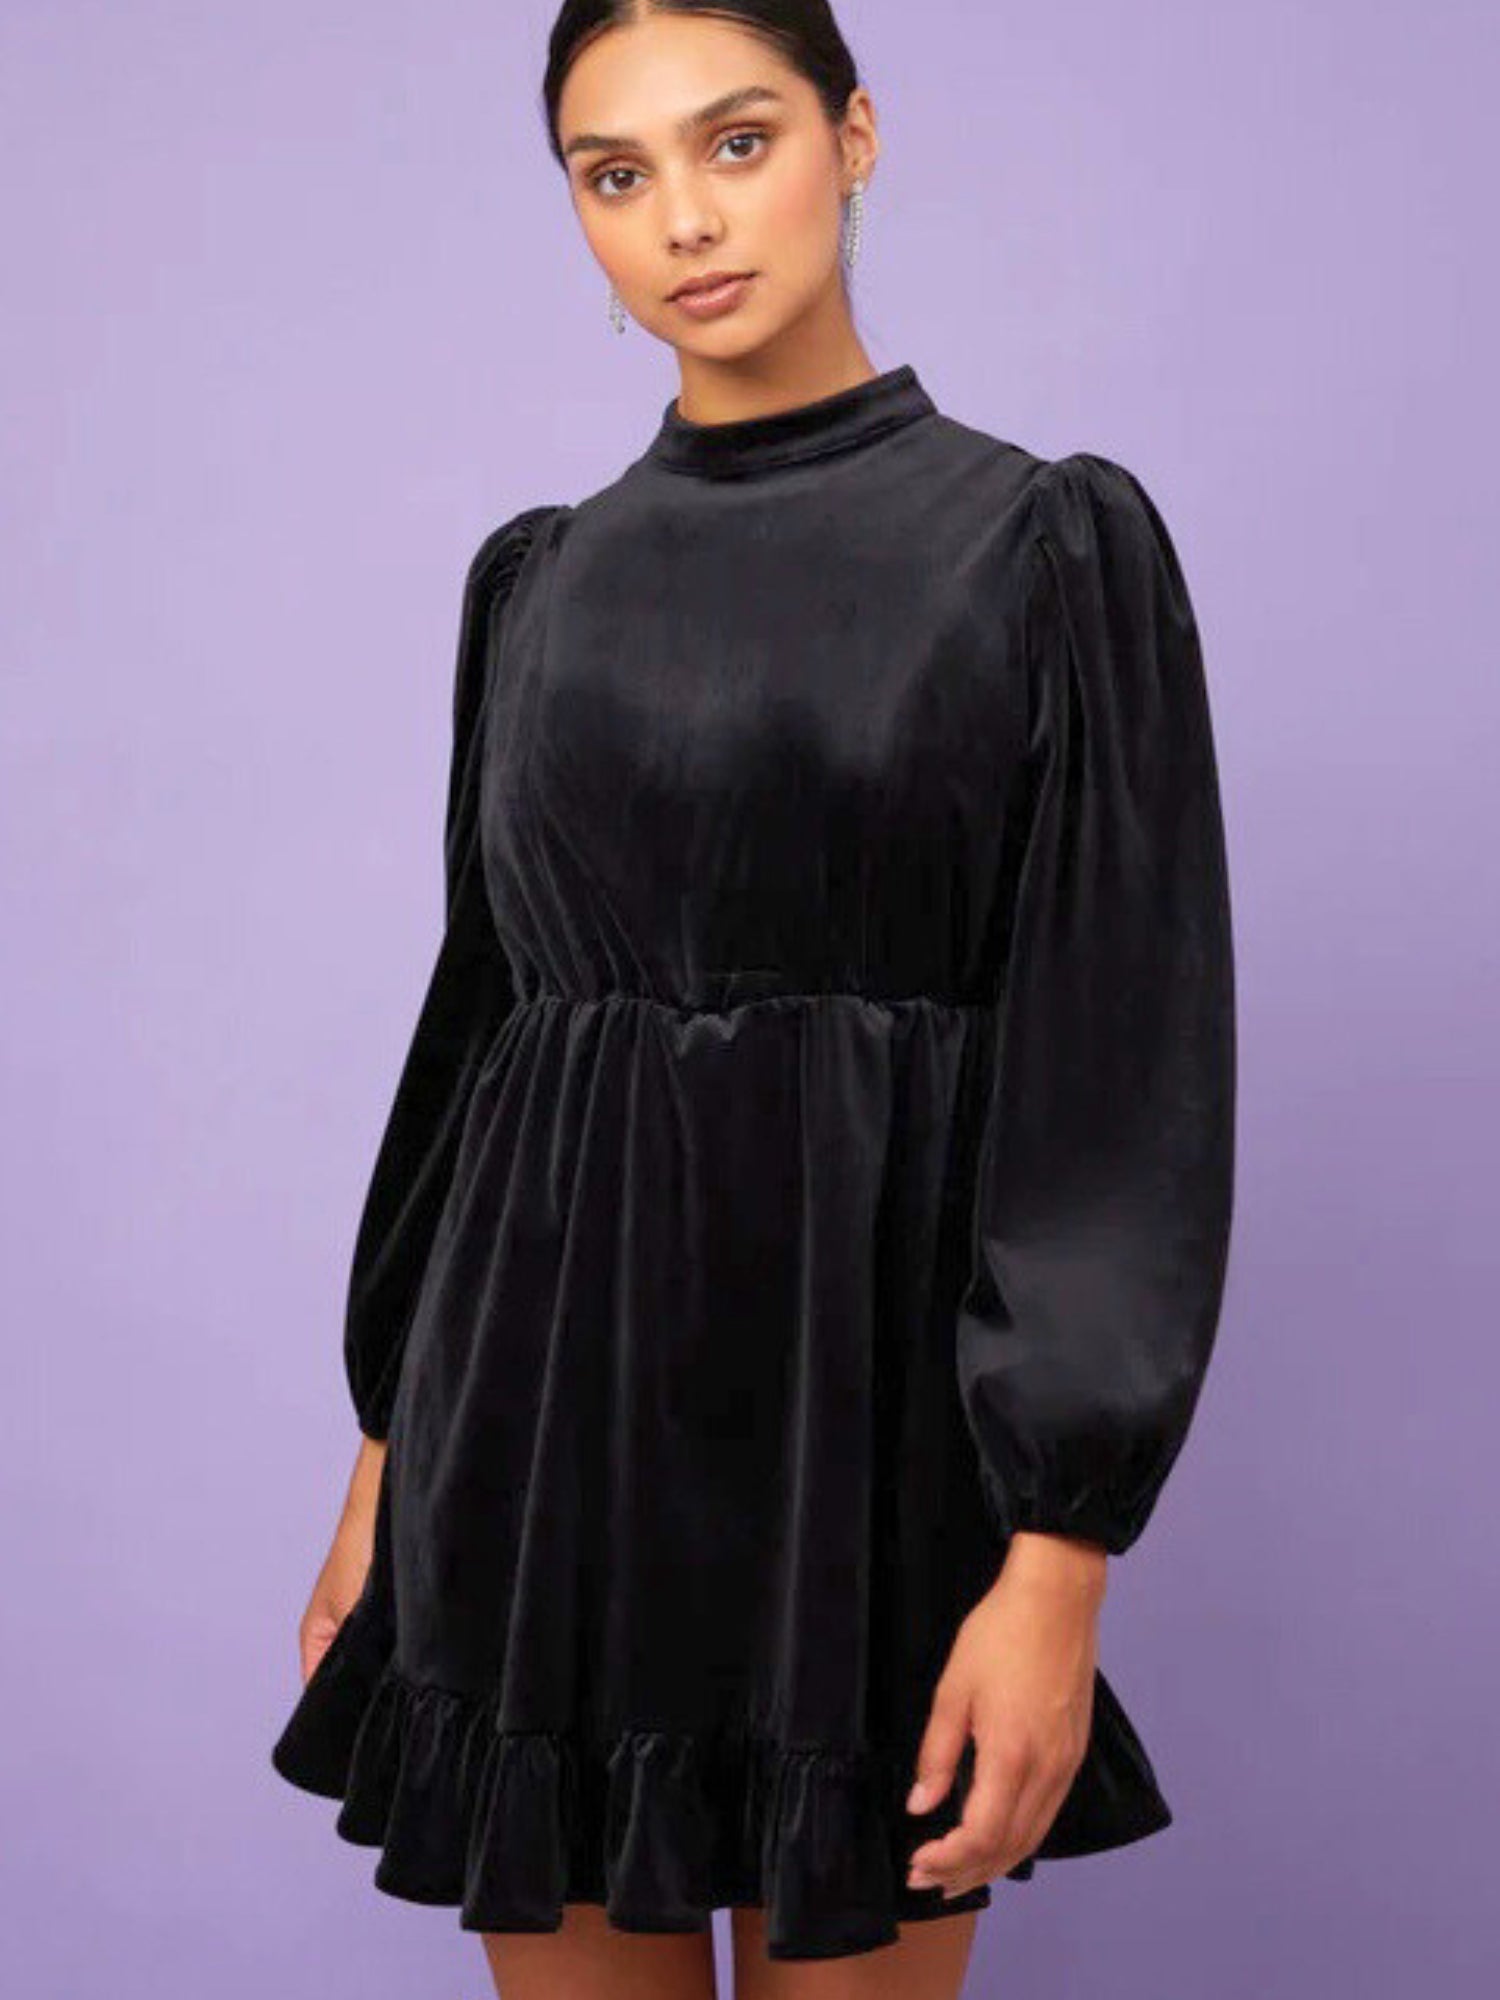 Midnight Velvet Mini Dress - The sweetest black velvet dress, perfect for the holidays! The Midnight Velvet Mini Dress by Sister Jane is made of a soft velvet fabric. It features a heart shaped cut out on the back framed with hanging gem trim. The back is